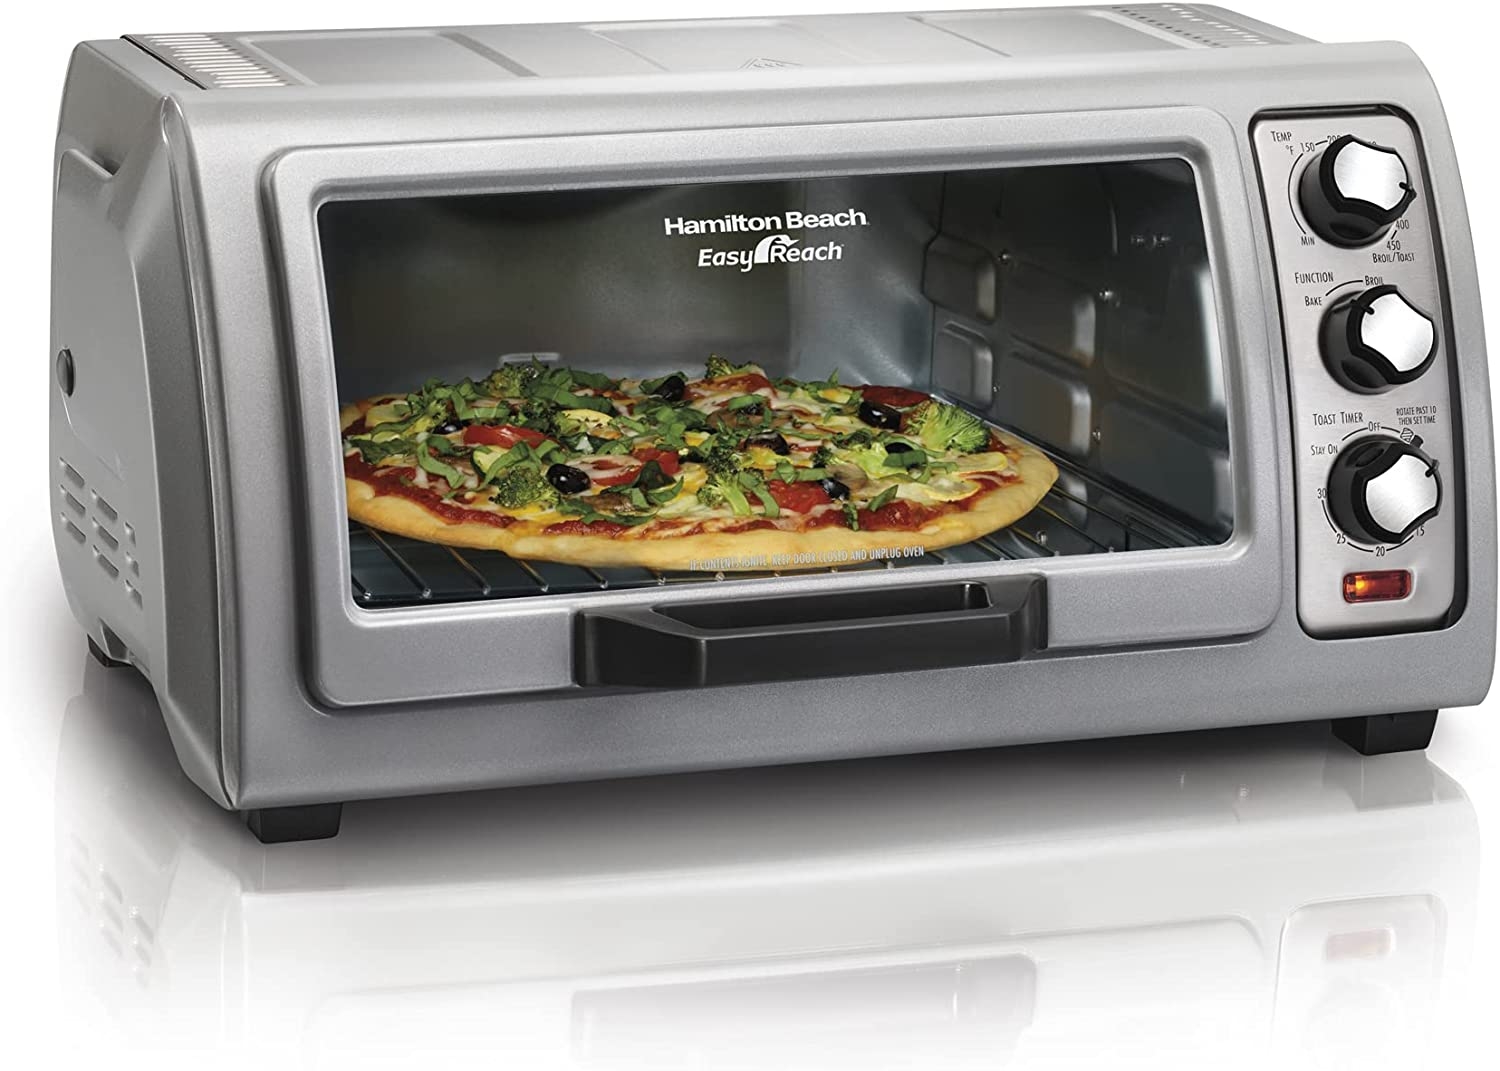 Hamilton Beach 6-Slice Countertop Toaster Oven with Easy Reach Roll-Top Door, Bake Pan, Silver (31127D) Import To Shop ×Product